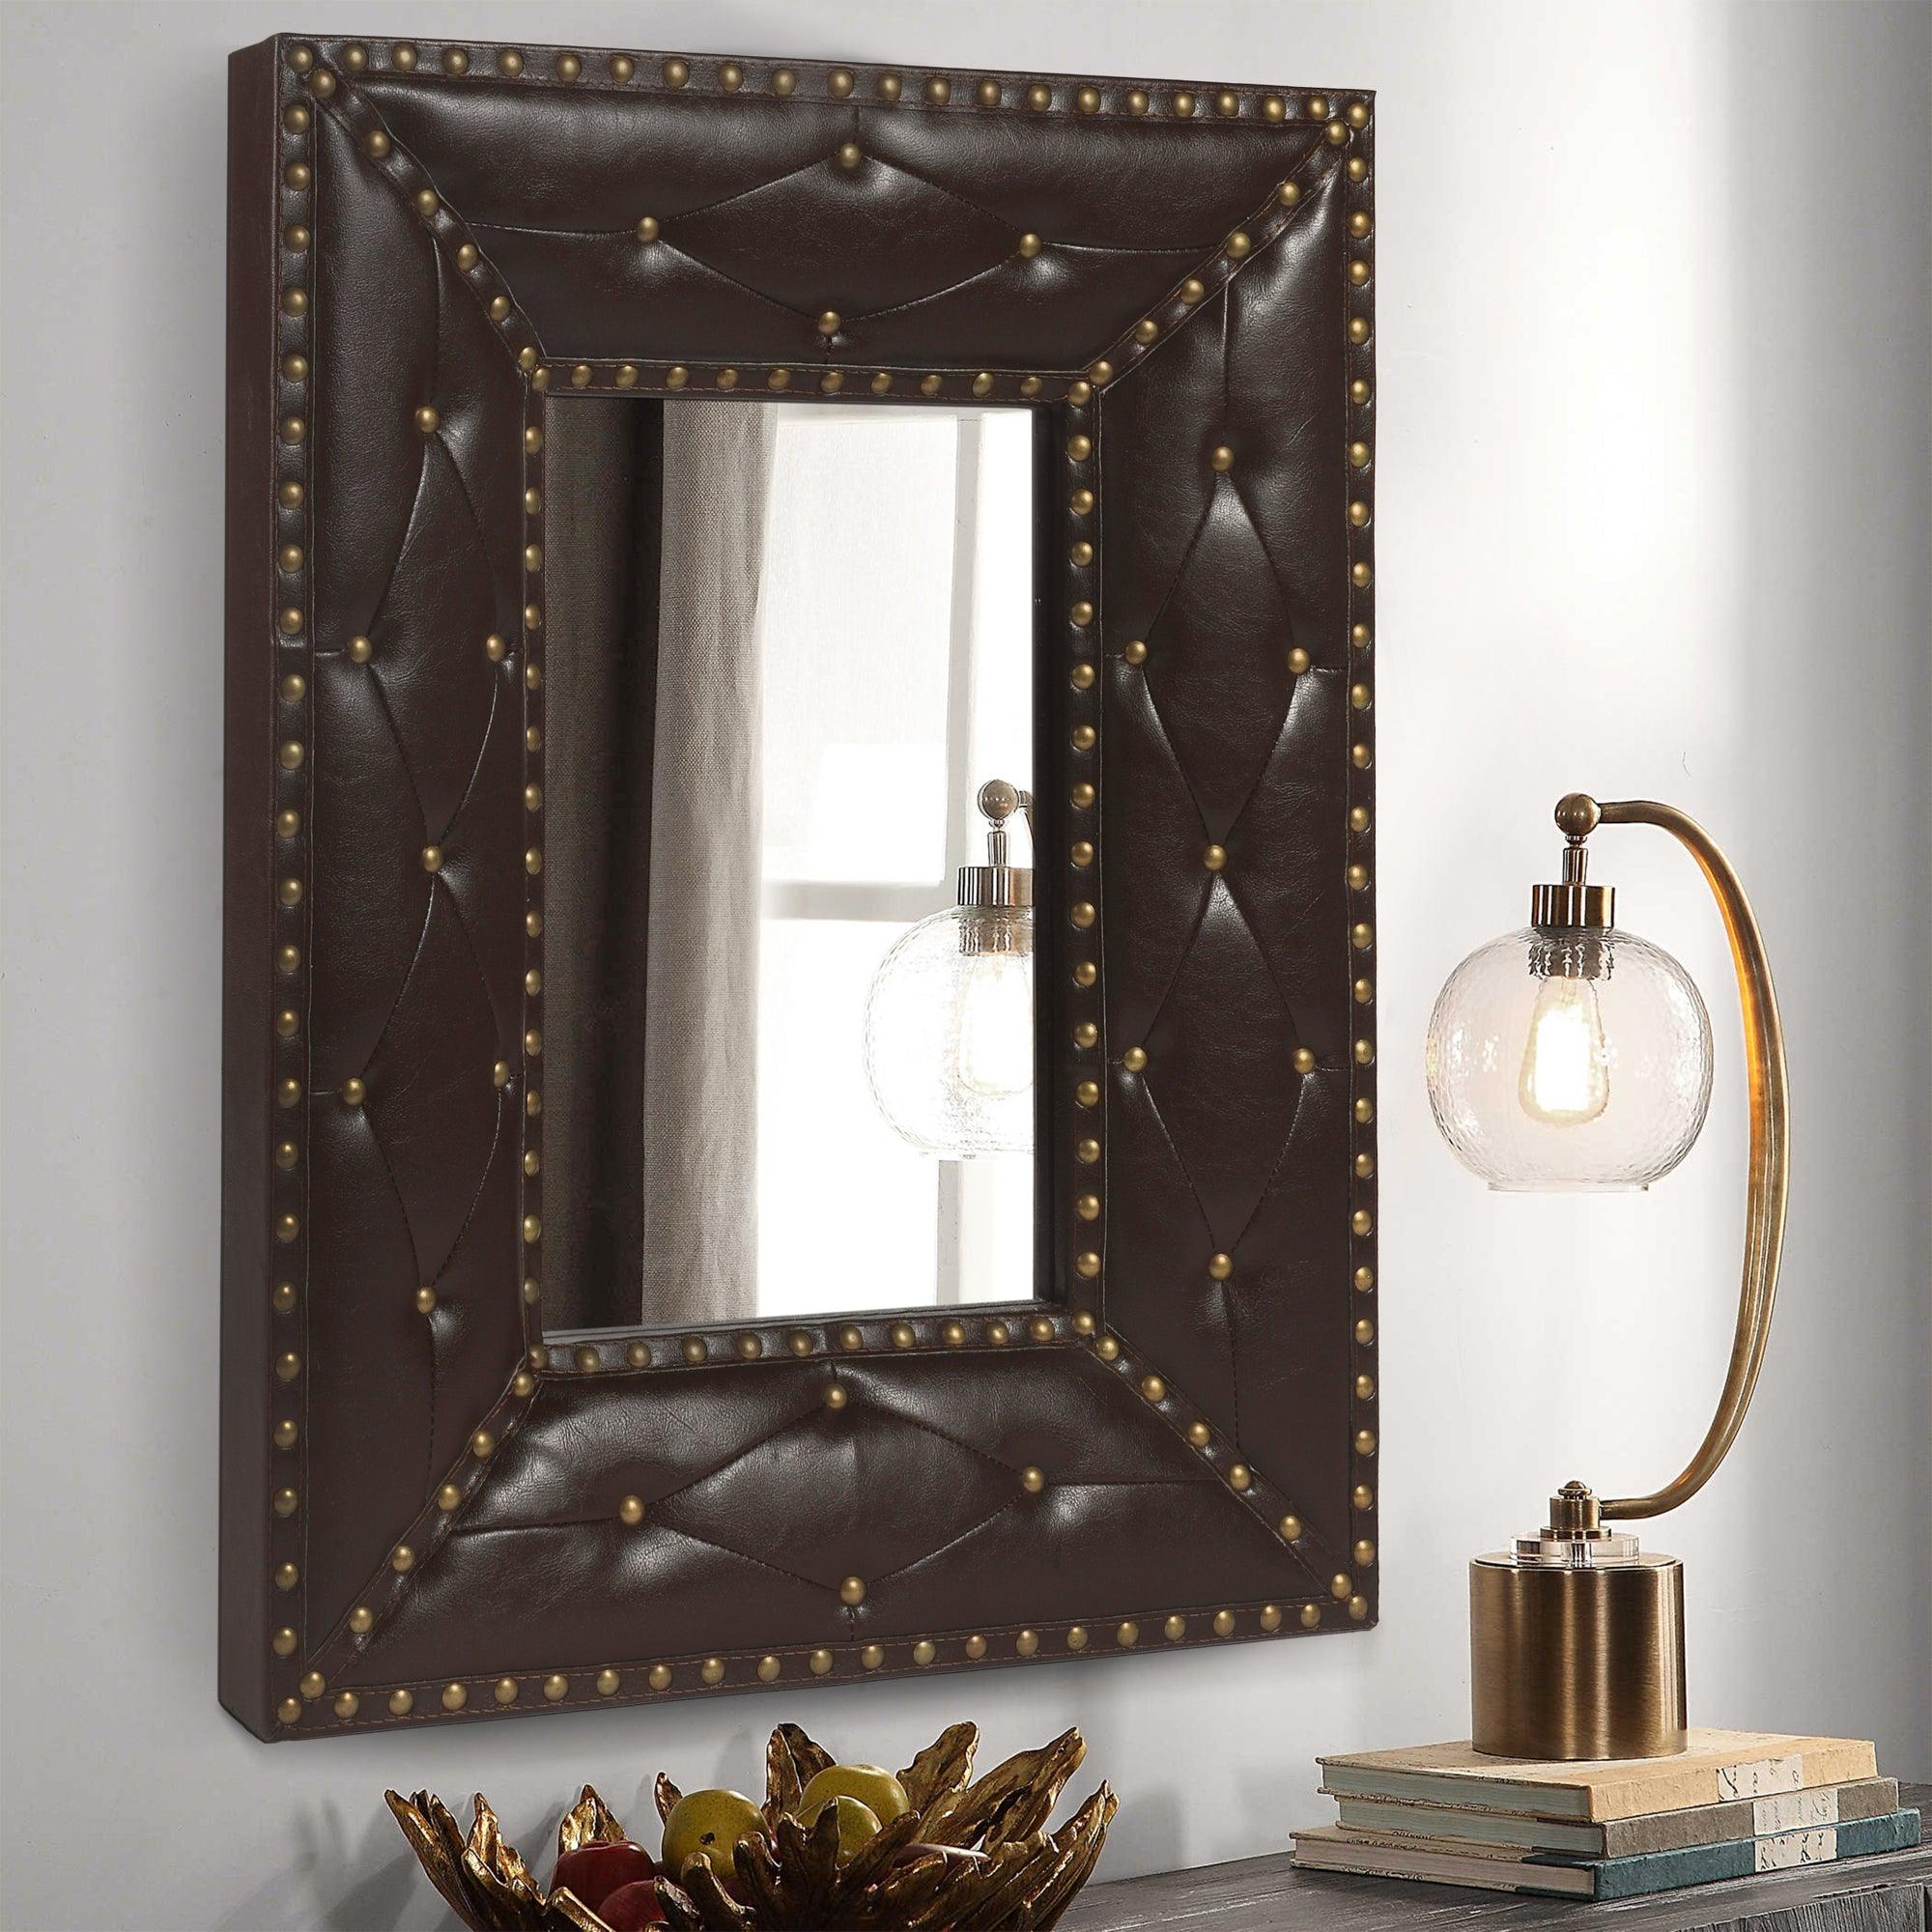 Brown Rectangle Decorative Wall Hanging Mirror, Rivet Decoration, PU Covered MDF Framed Mirror For Bedroom Living Room Vanity Entryway Wall Decor, 21X26Inch LamCham